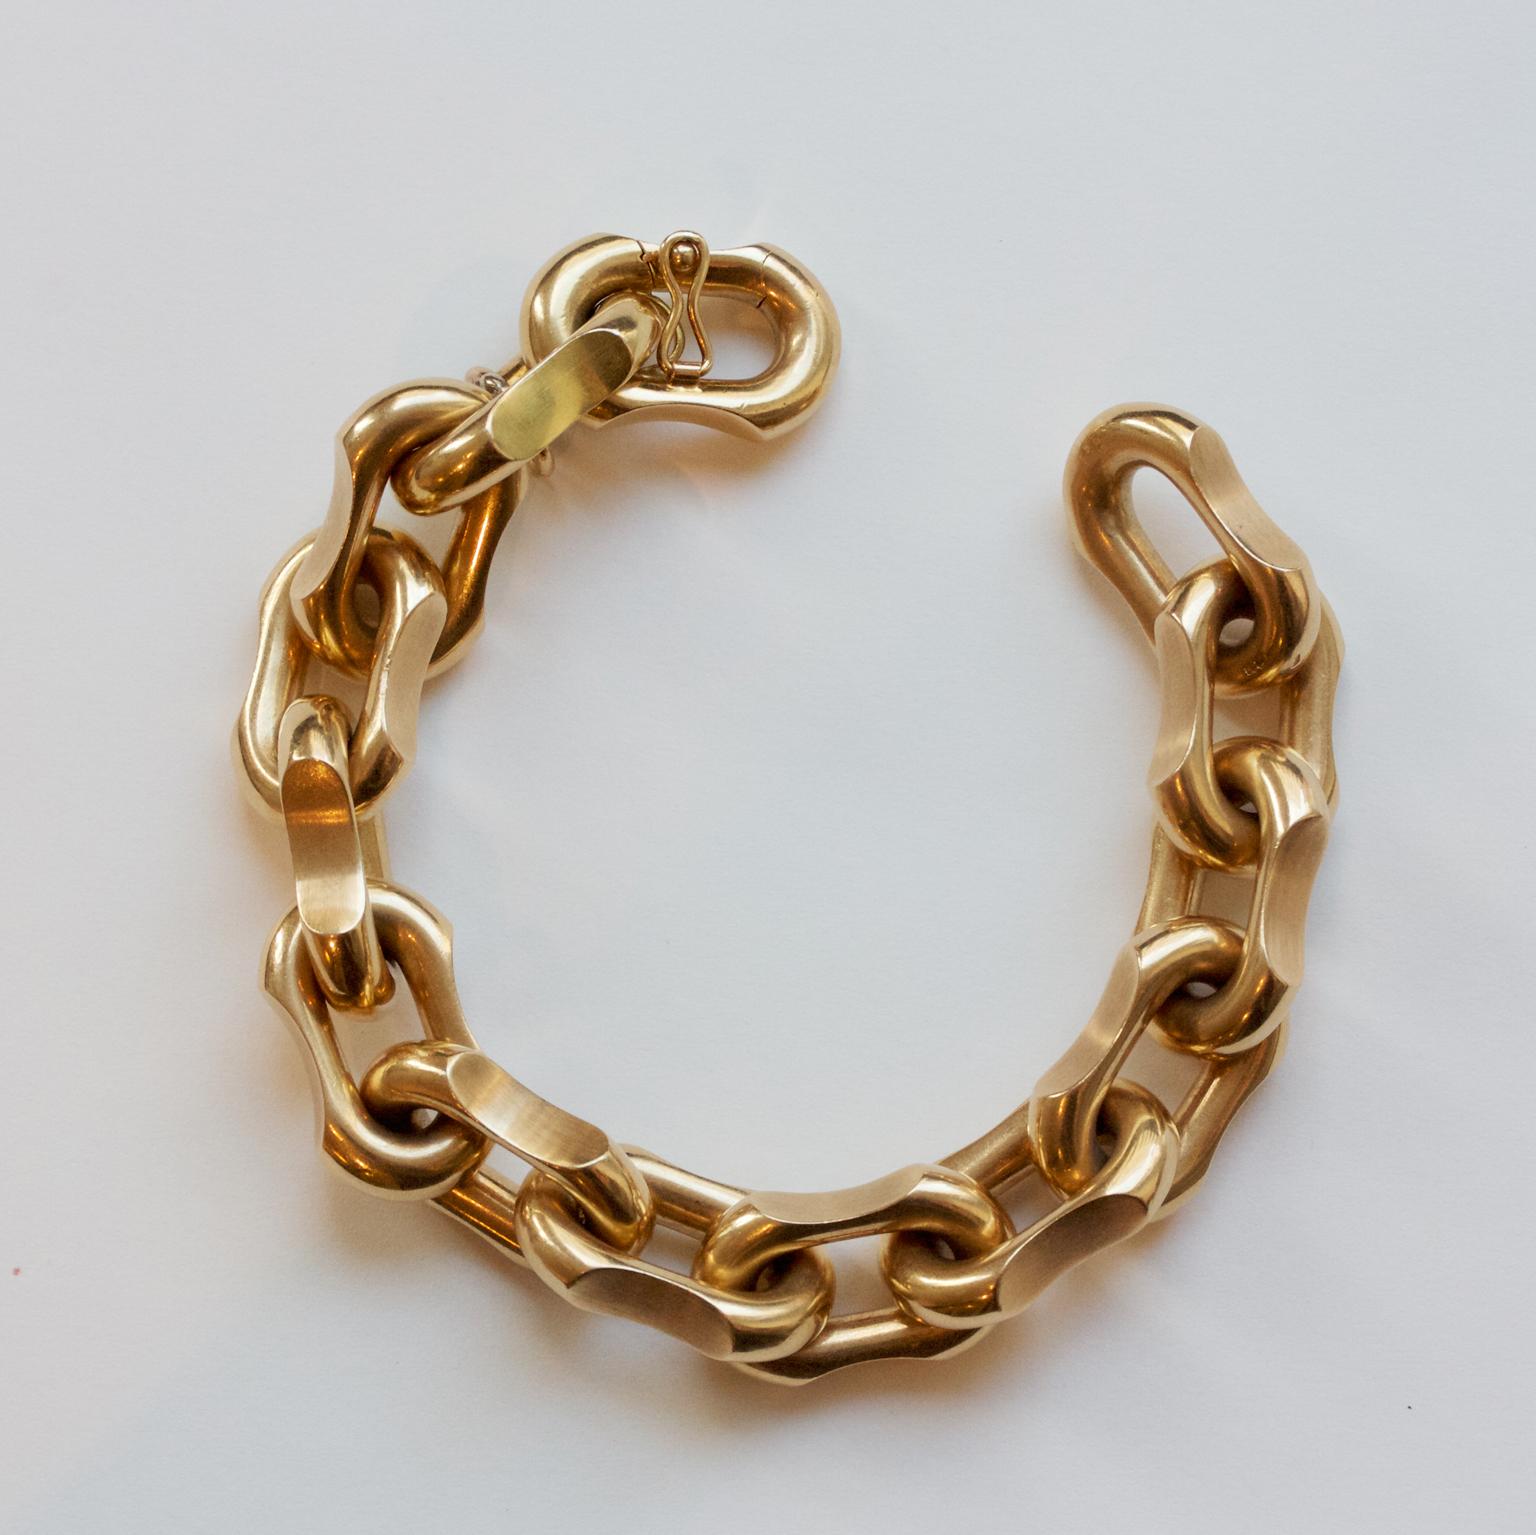 An 18 carat gold bracelet with high polished oval links with matte notches on each side, an invisible lock and a large fixed oval bail for a charm, master mark France, 1970.

length: 20 cm
width: 1.5 cm
weight: 66 gram